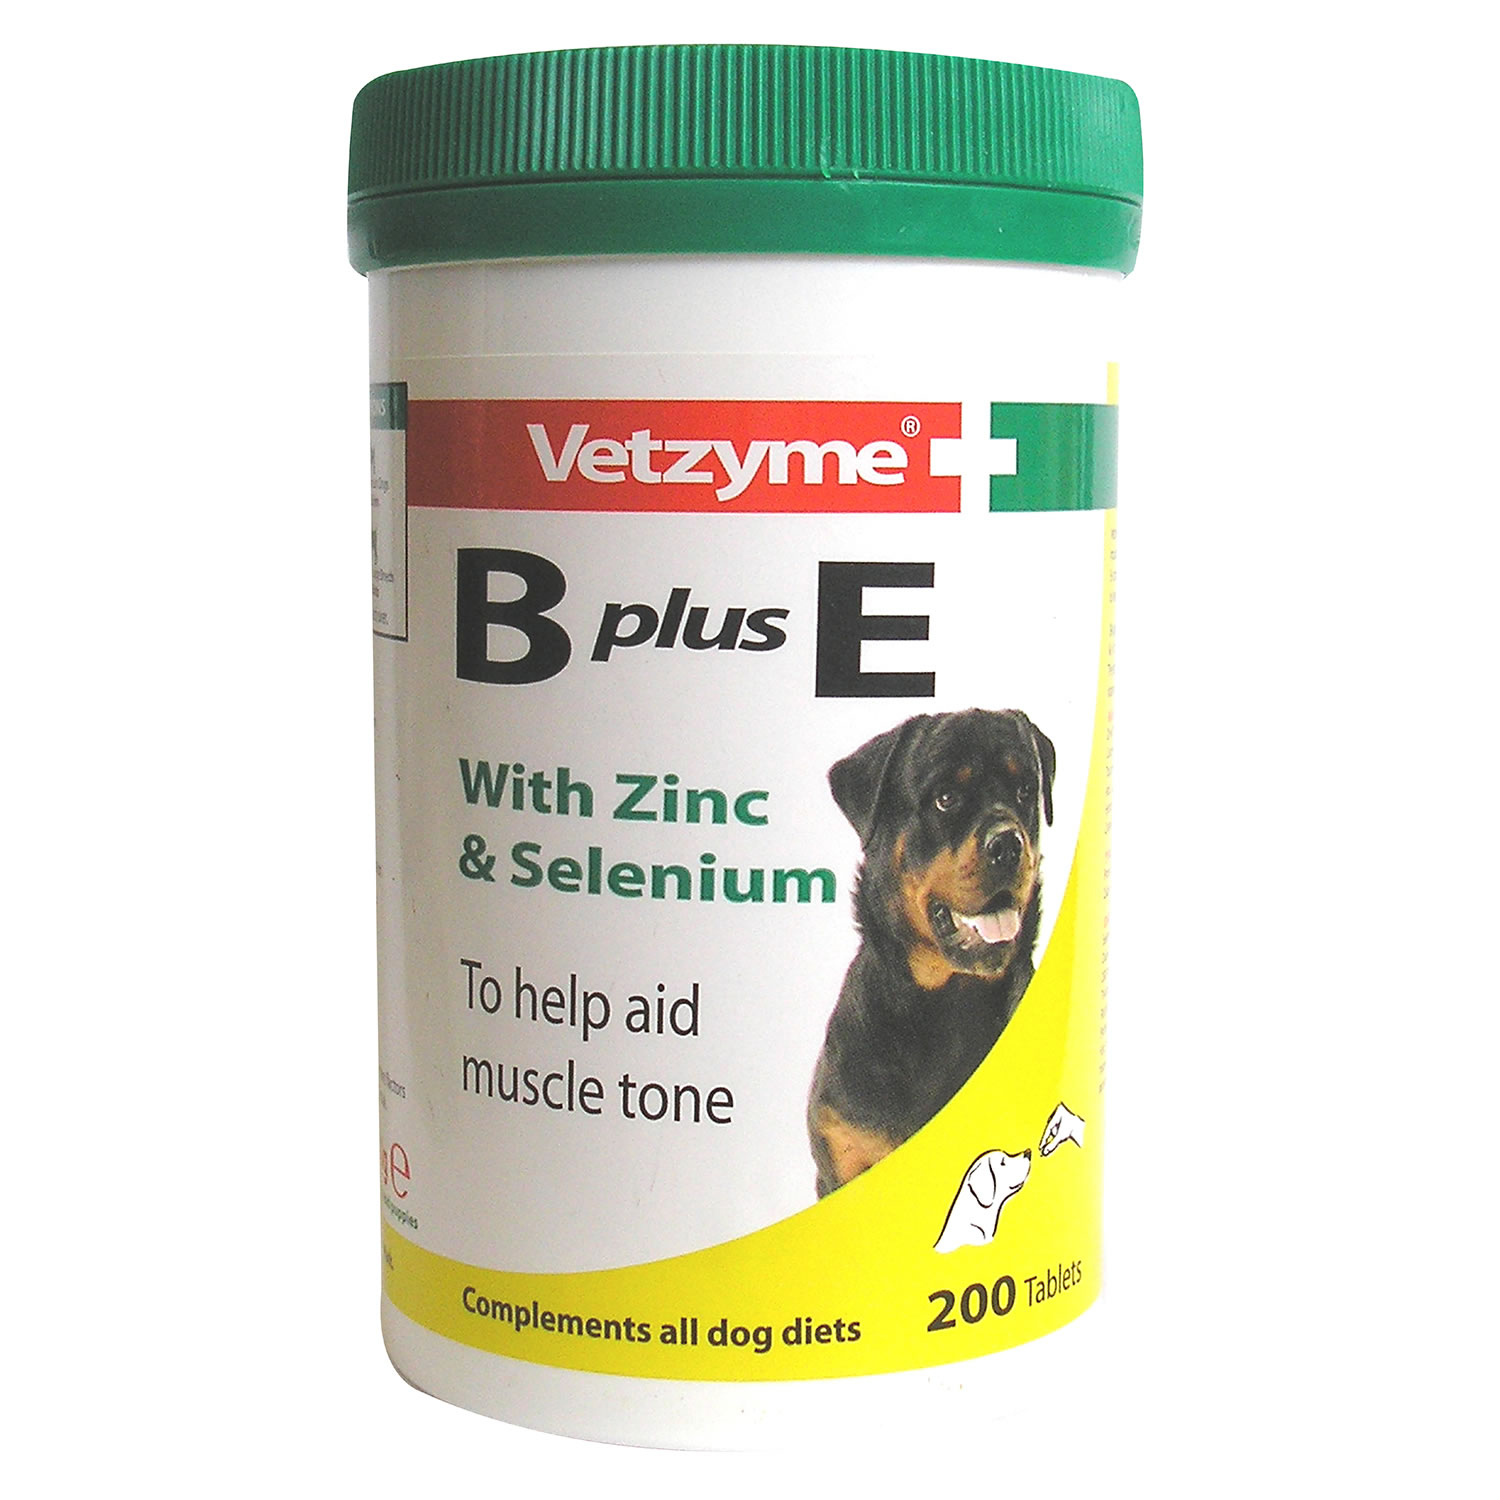 VETZYME B PLUS E TABLETS VETZYME B PLUS E TABLETS 200 PACK  200 PACK